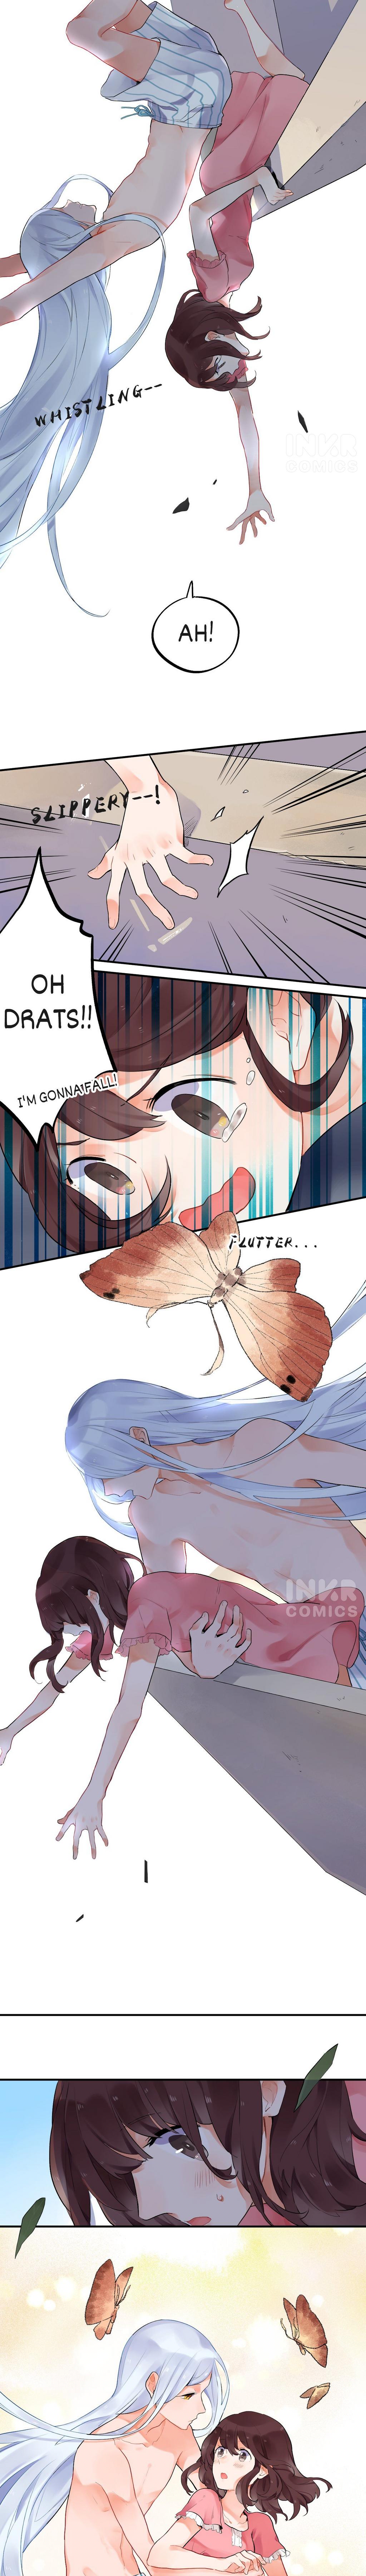 Sos! Falling In Love With A Moth! - Page 4